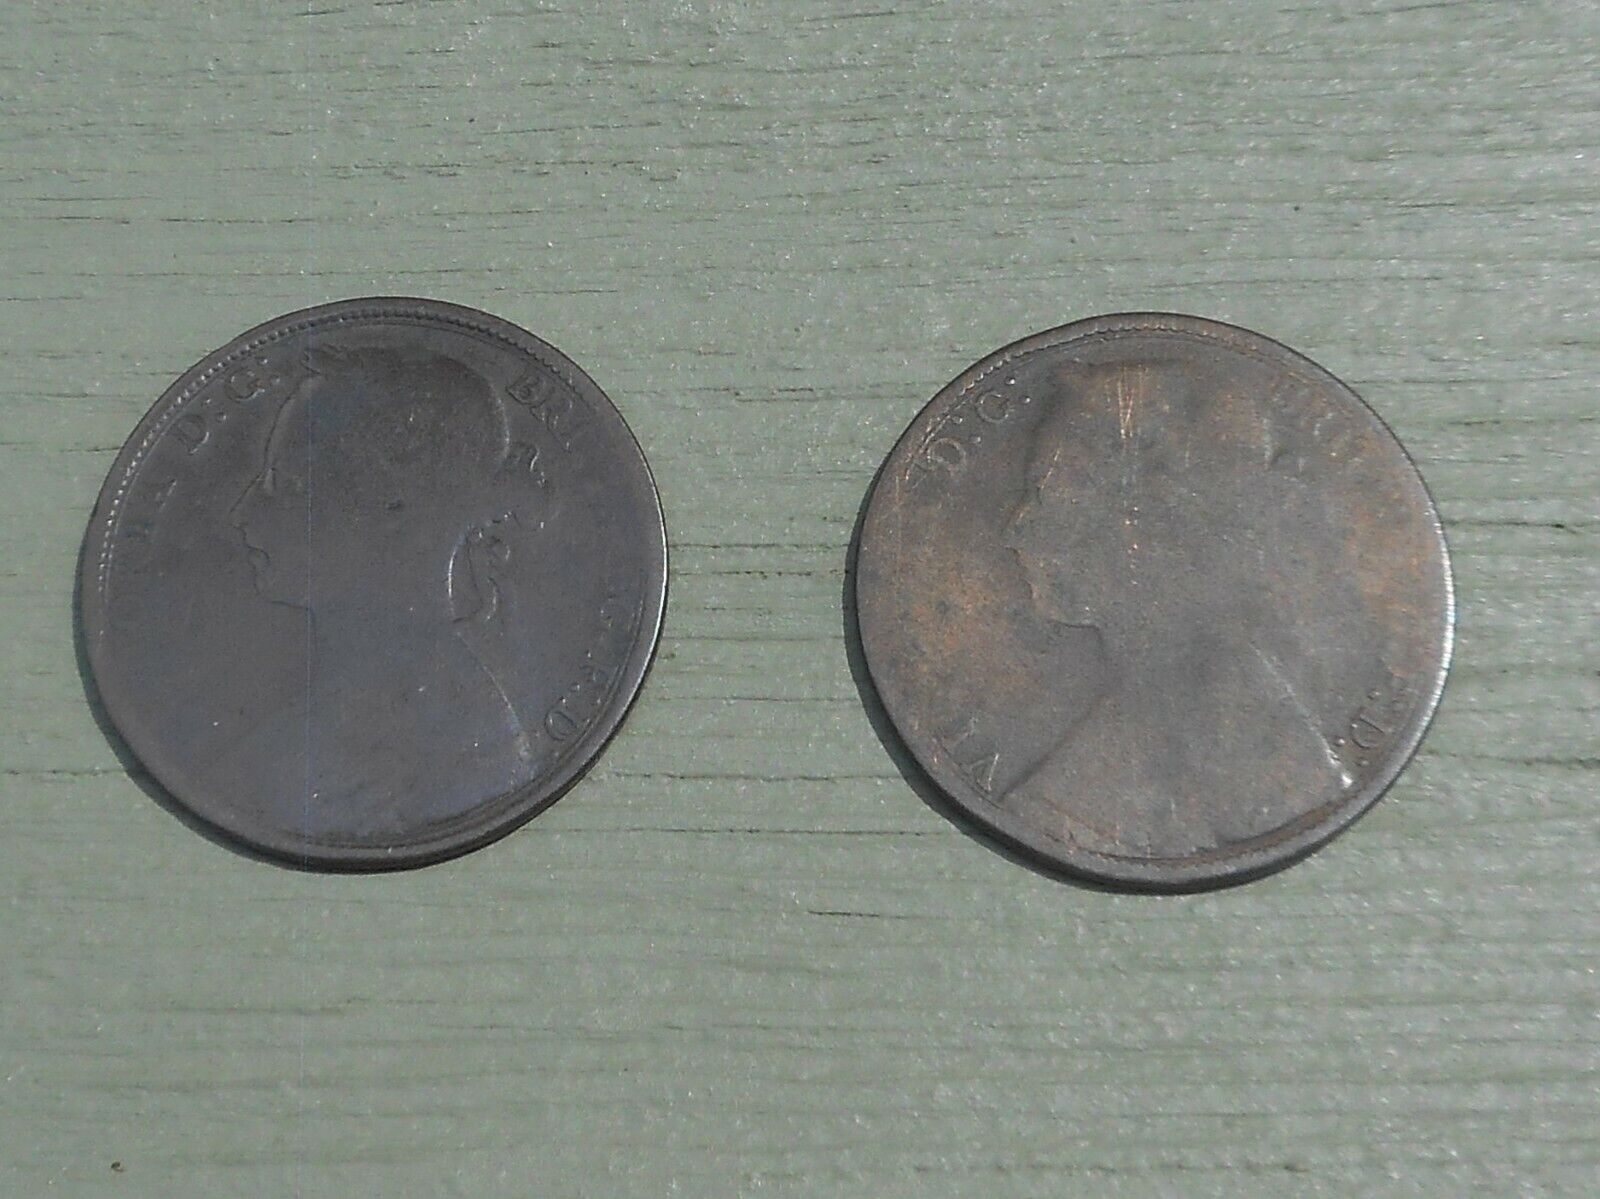 1877 & 1890 LOT OF 2 COINS BRITAIN One Penny 1 Pence Cent Queen Victoria Без бренда - фотография #11